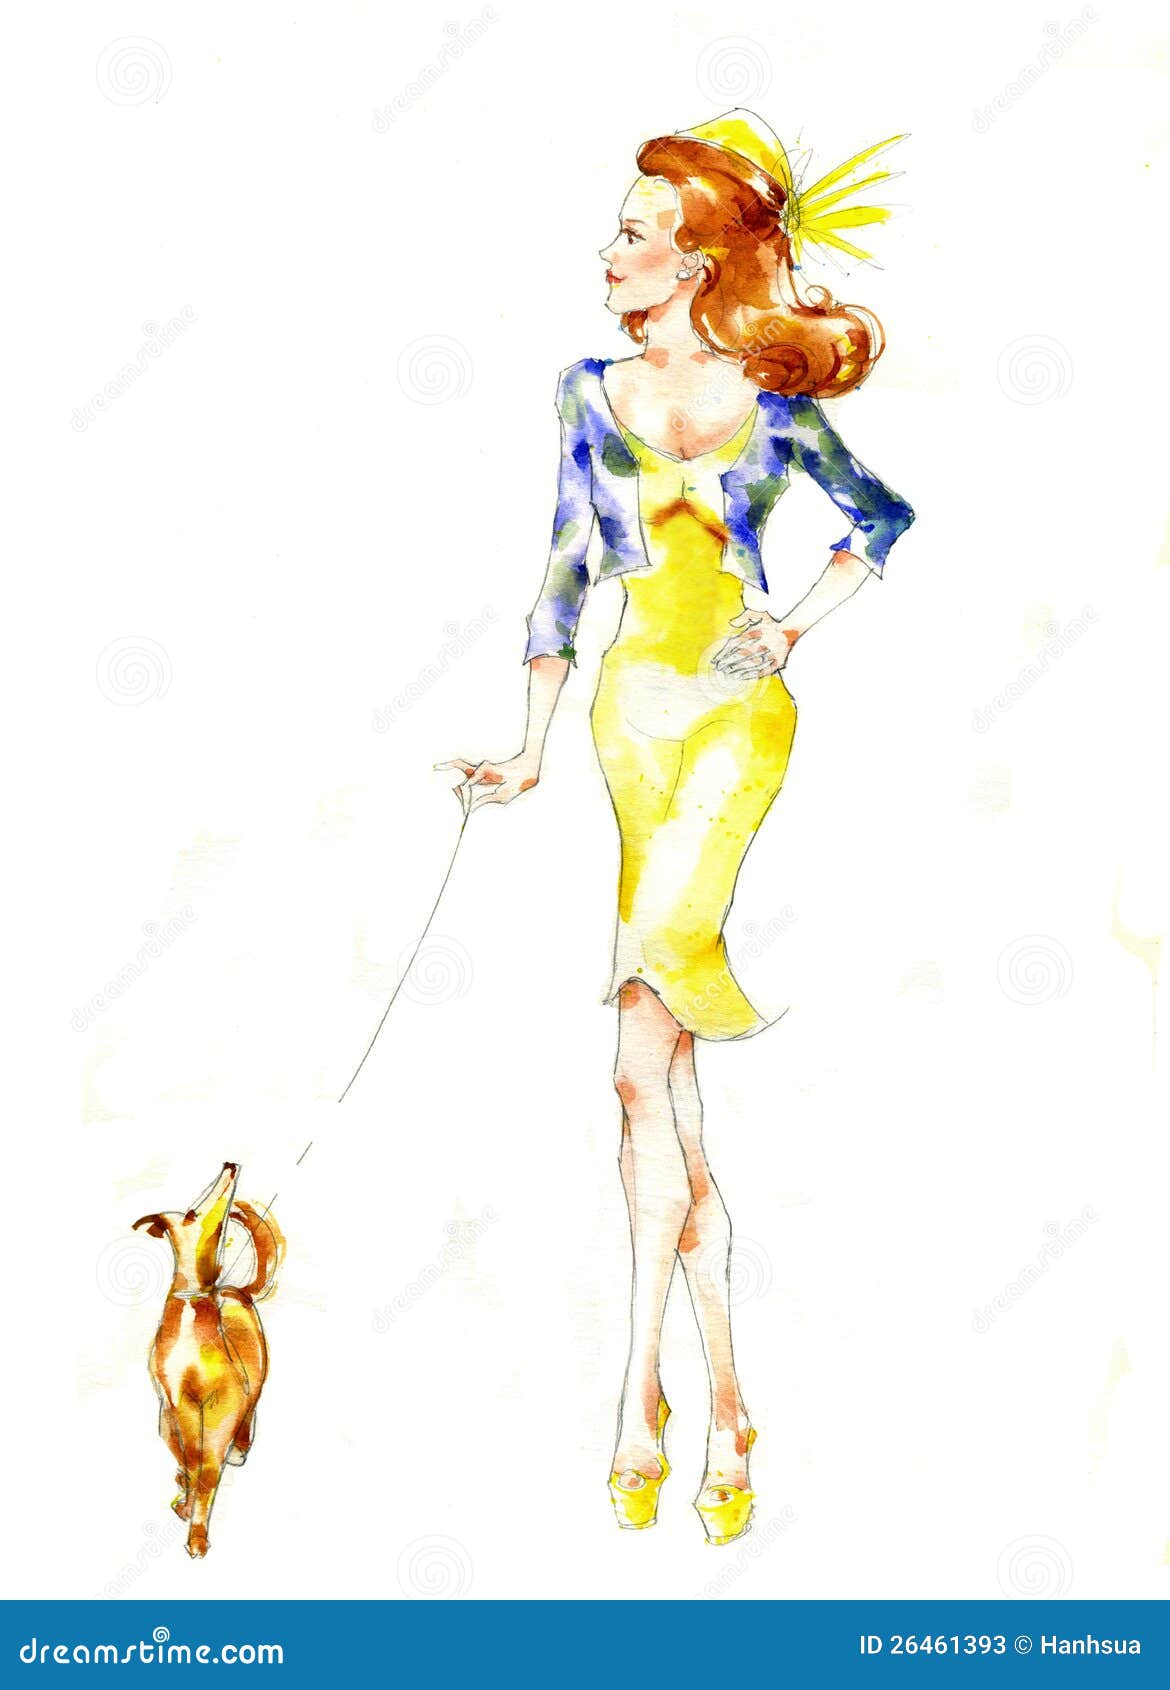 Girl walking with a dog stock illustration. Illustration of drawing ...